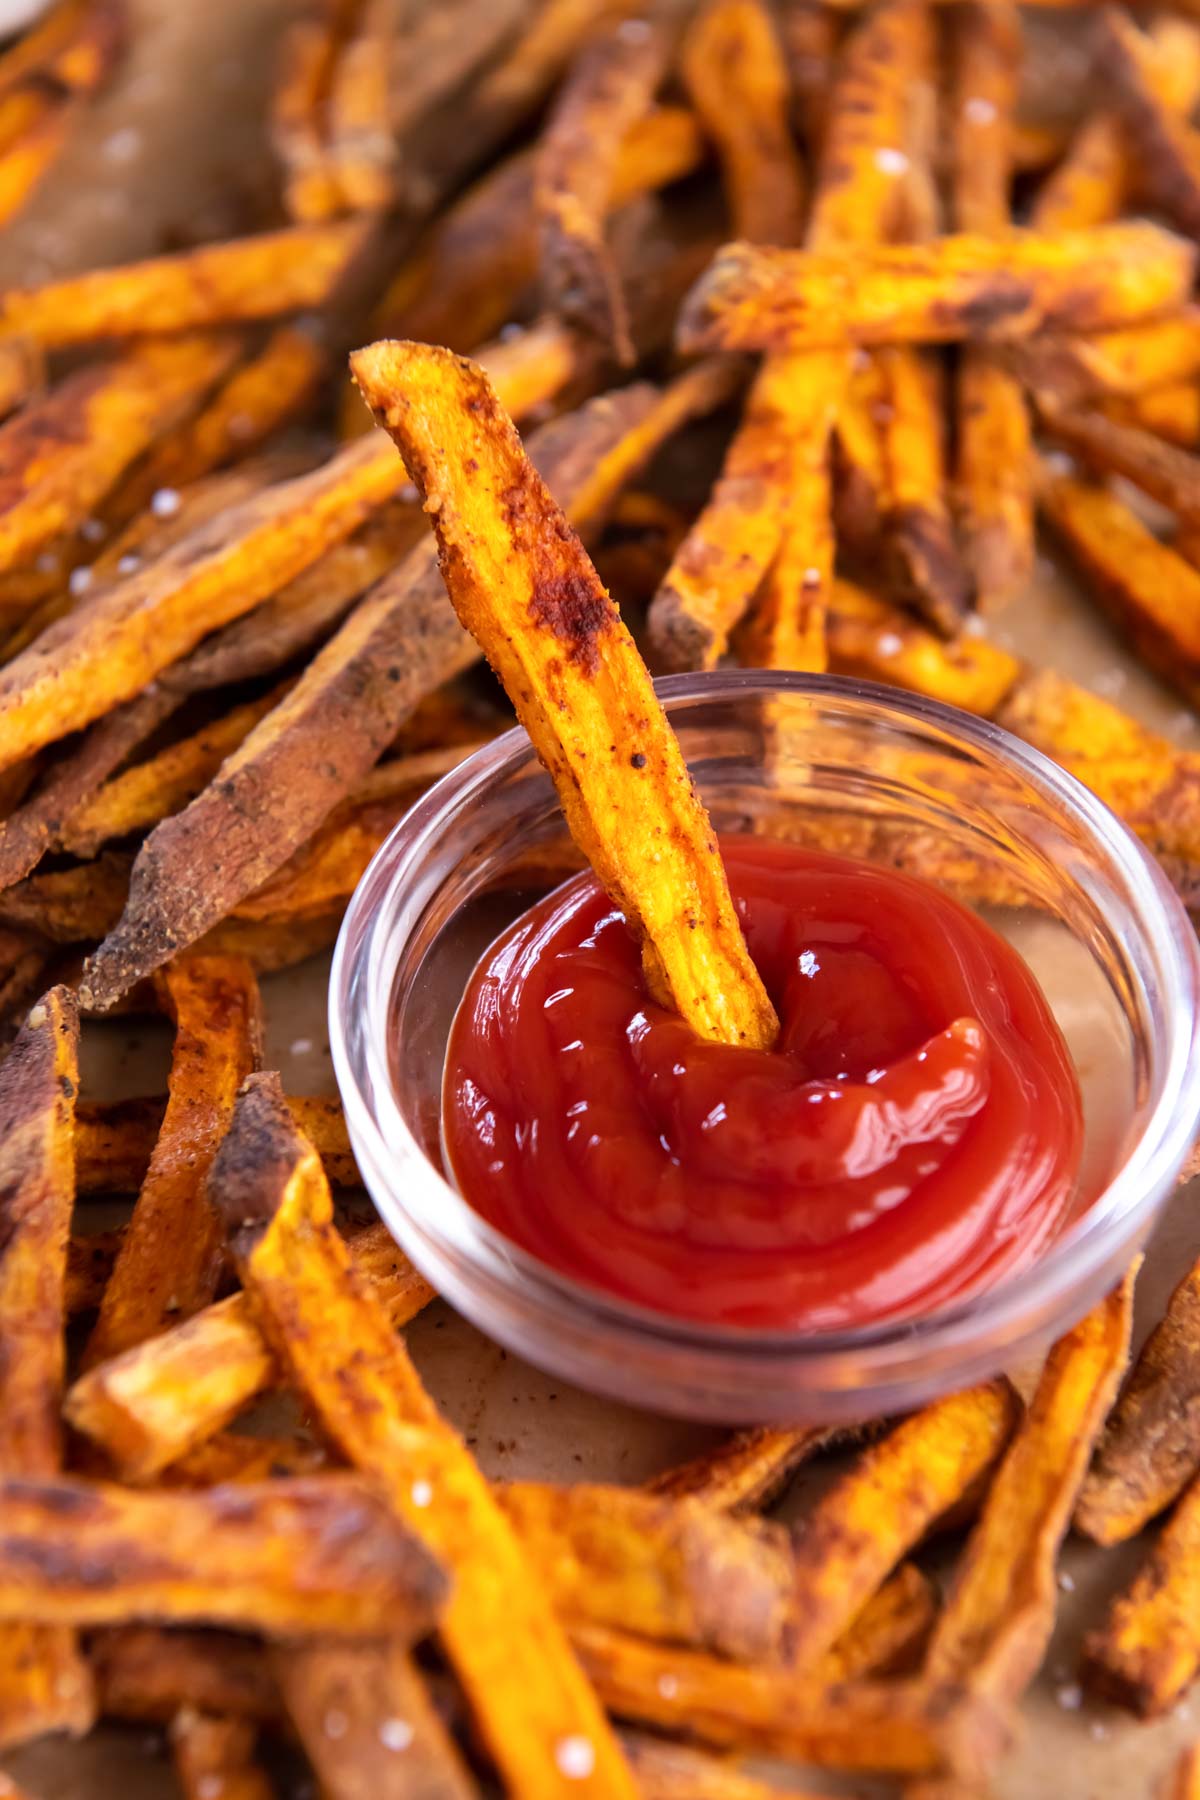 Sweet potato fry dipped in small dish of ketchup.